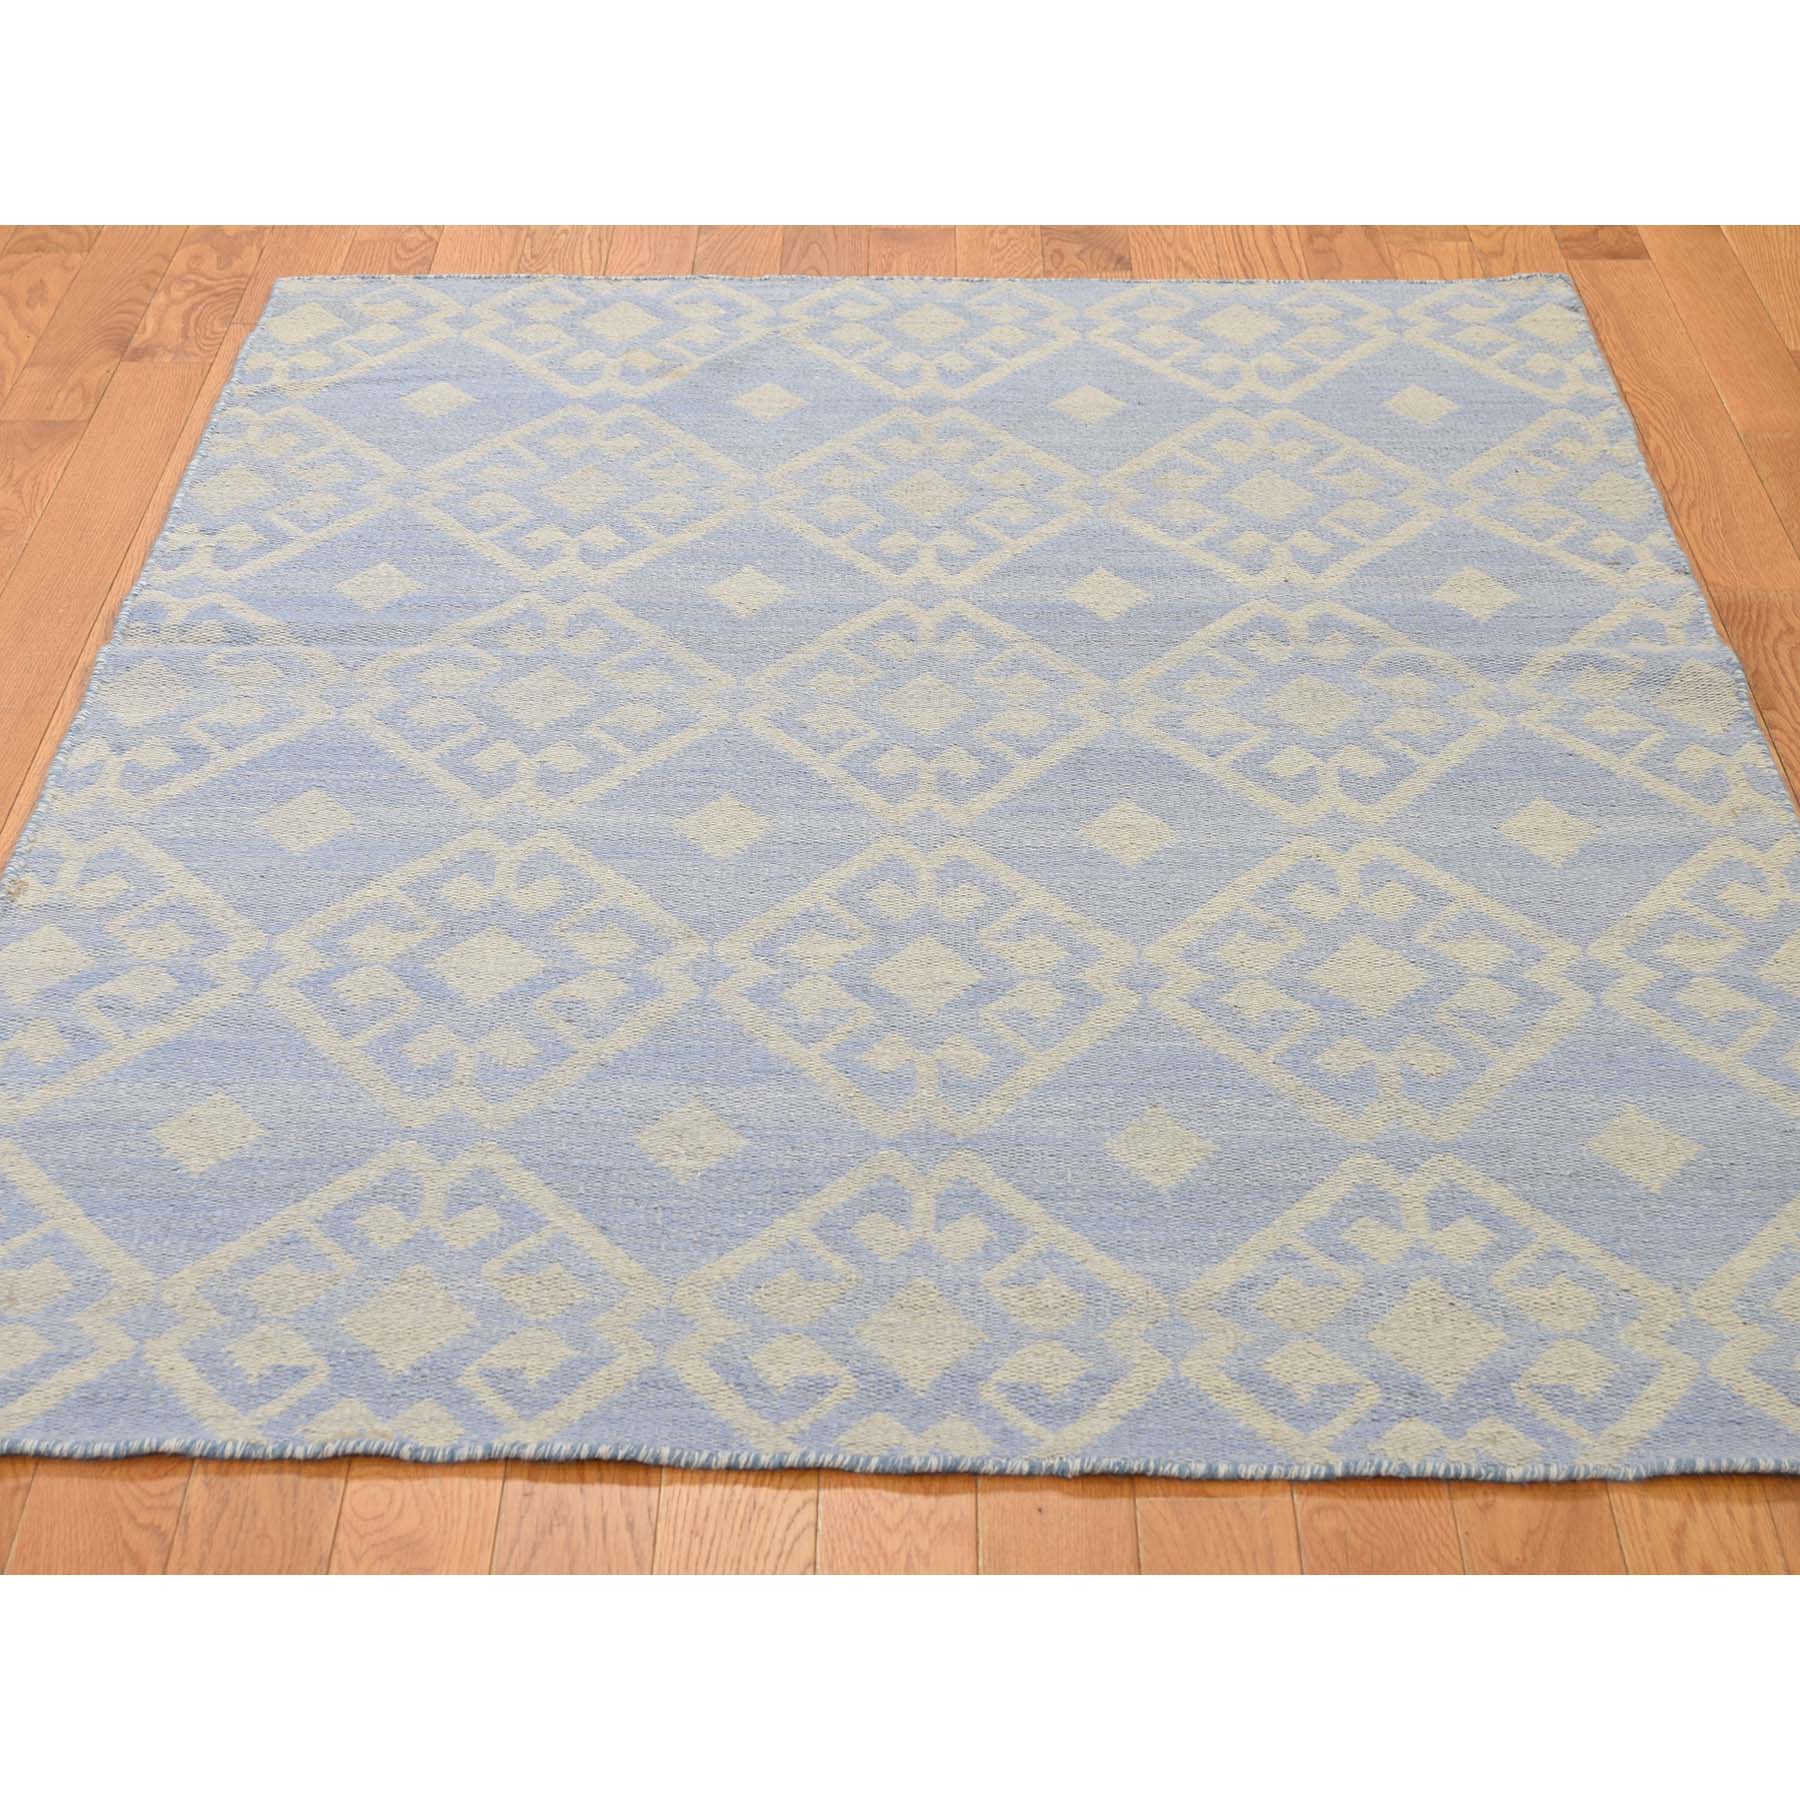 4-x6- Flat Weave Hand Woven Durie Kilim Reversible Oriental Rug 